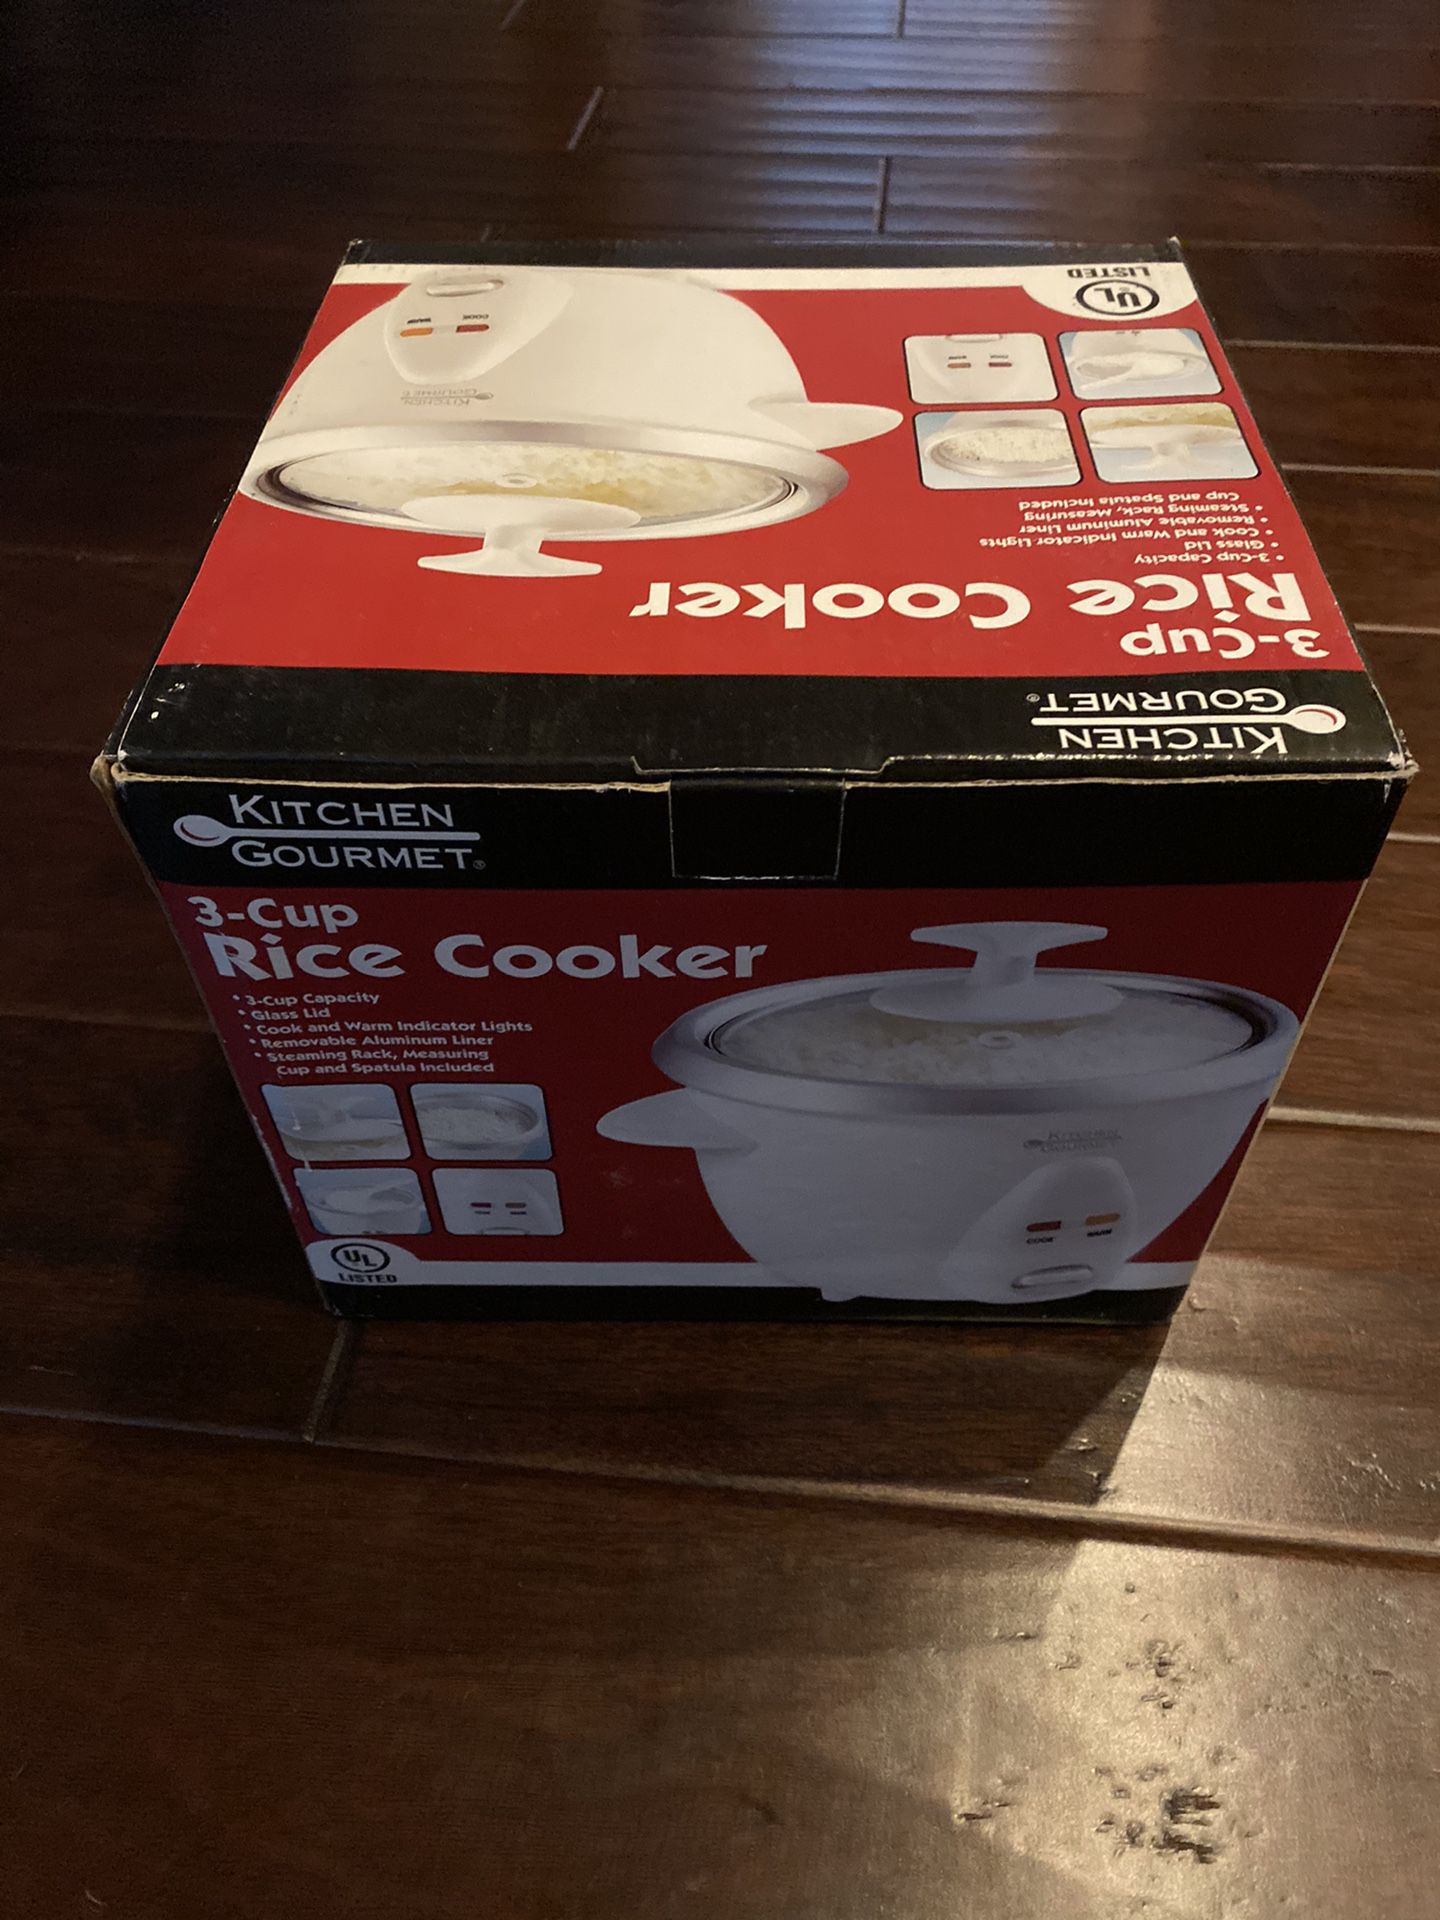 Brand new 3-cup rice cooker